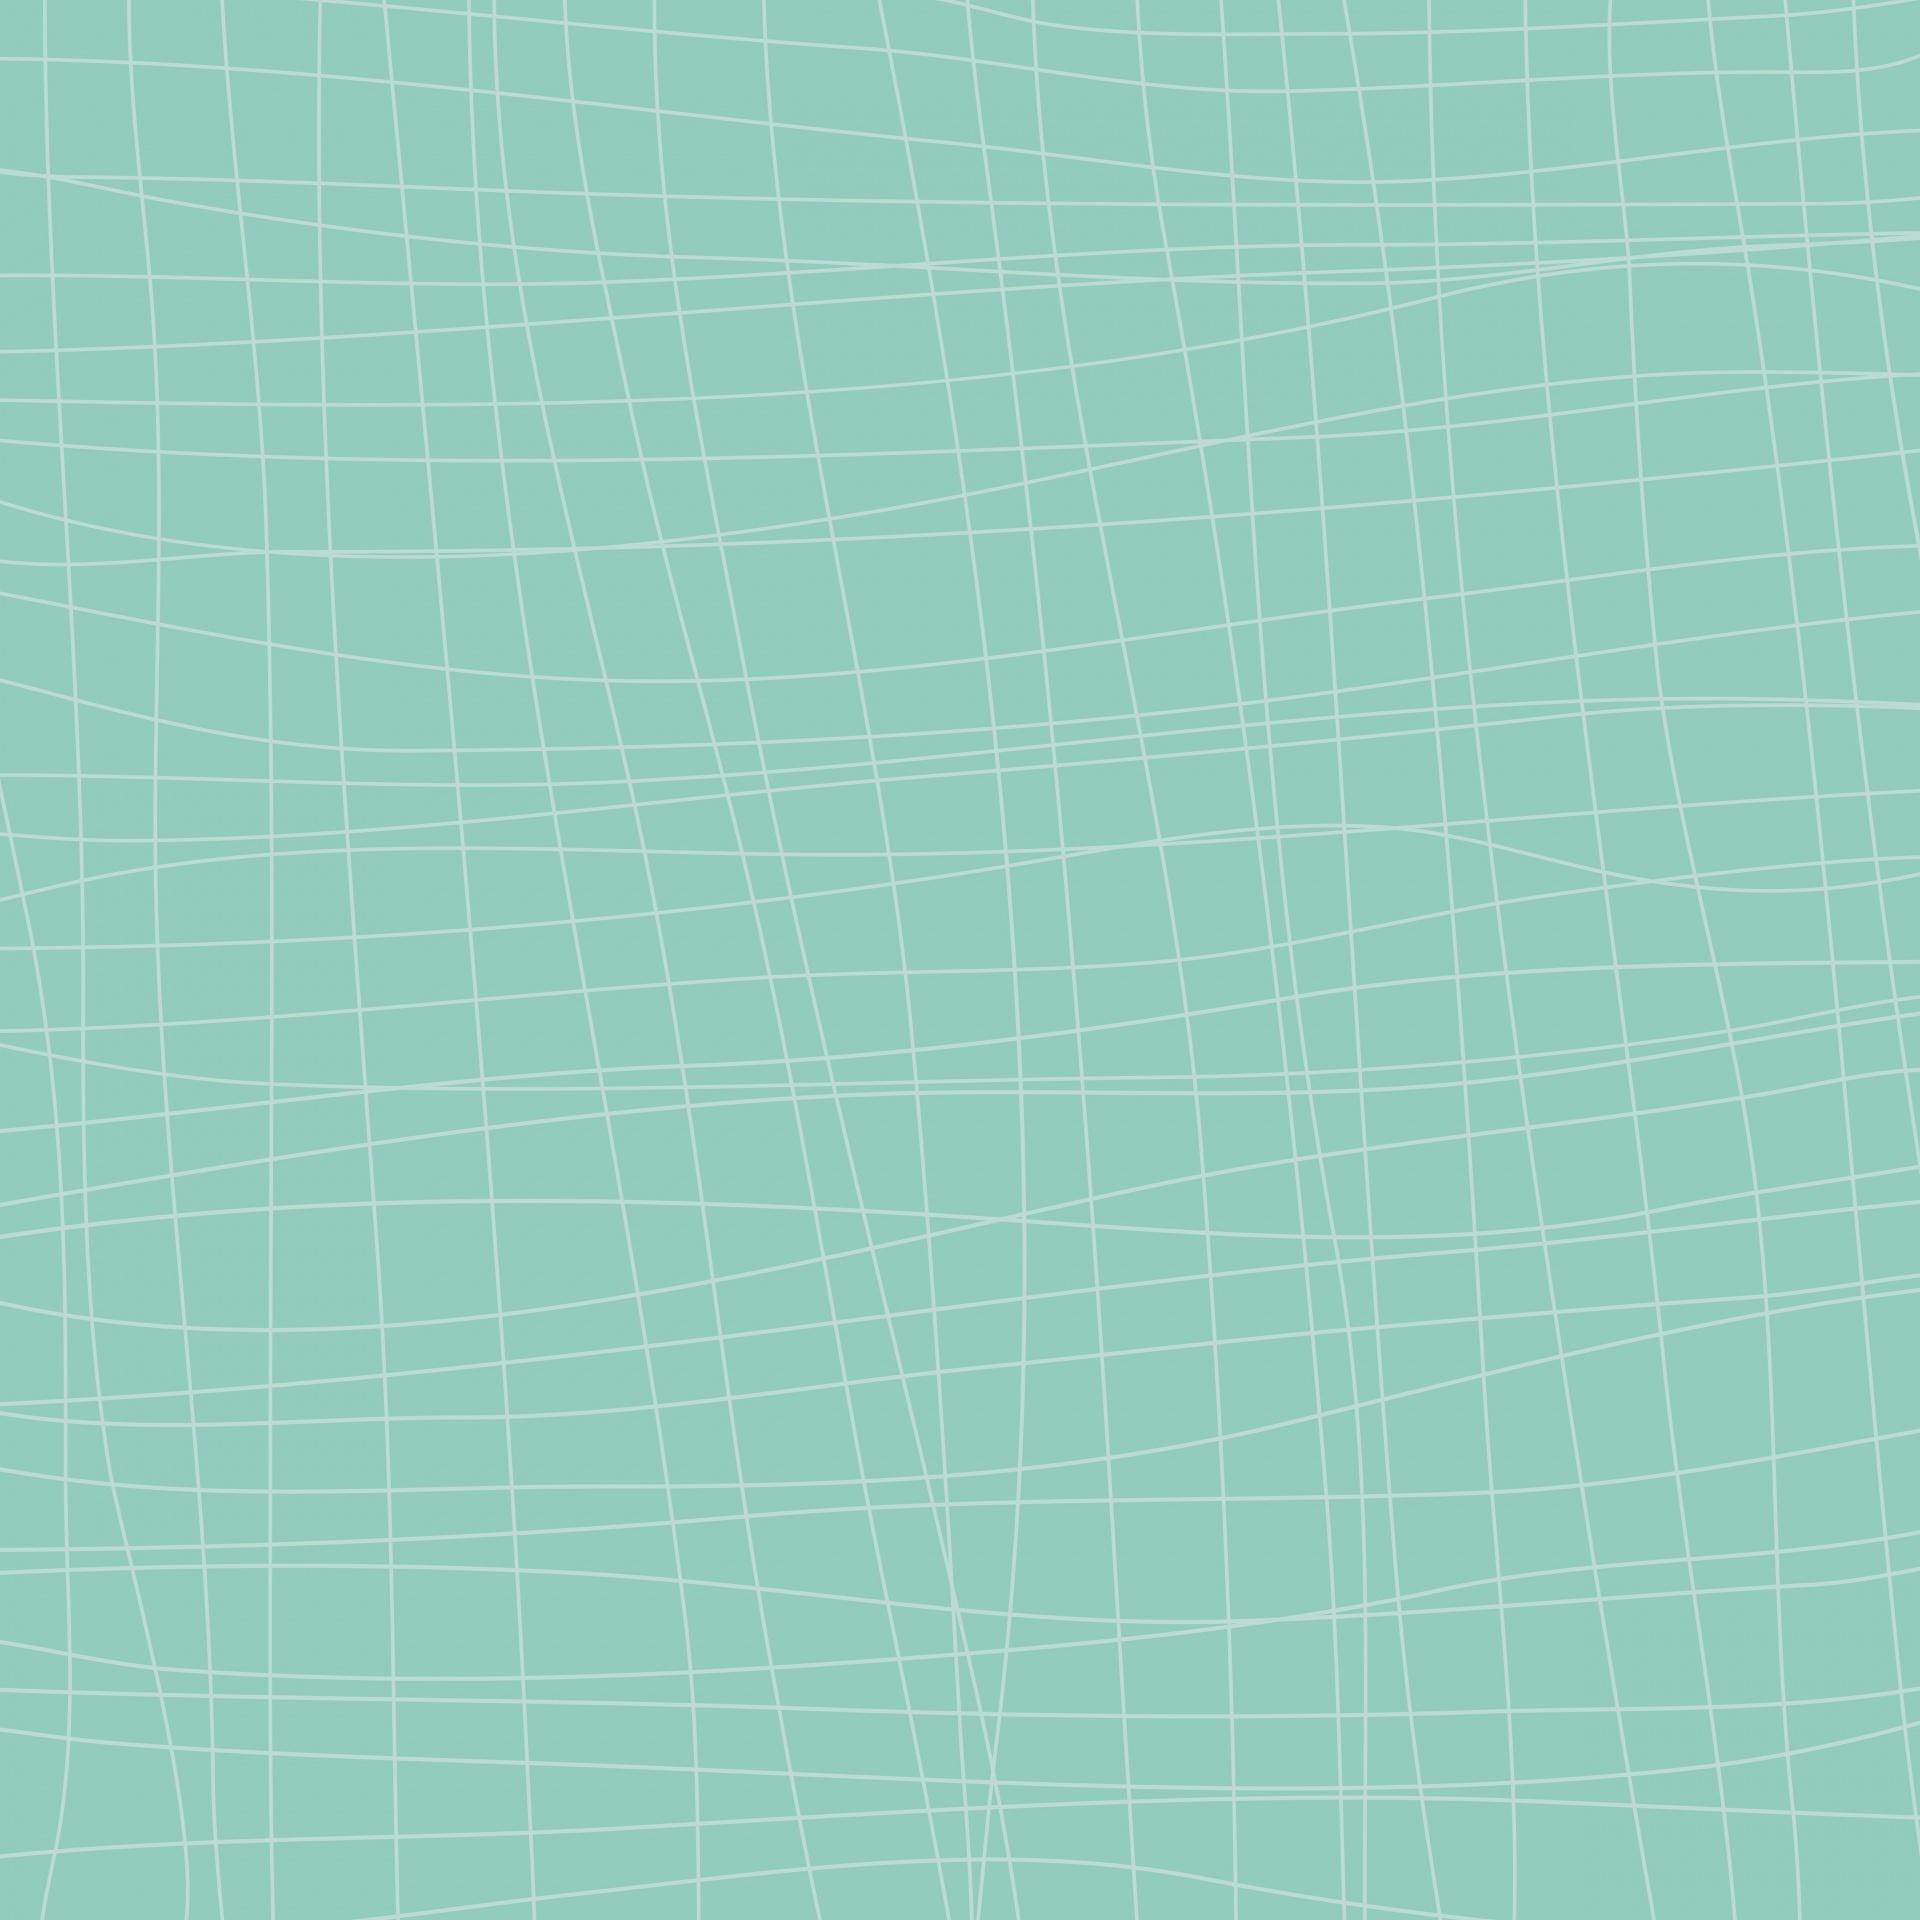 Wonky Lines On Teal Background